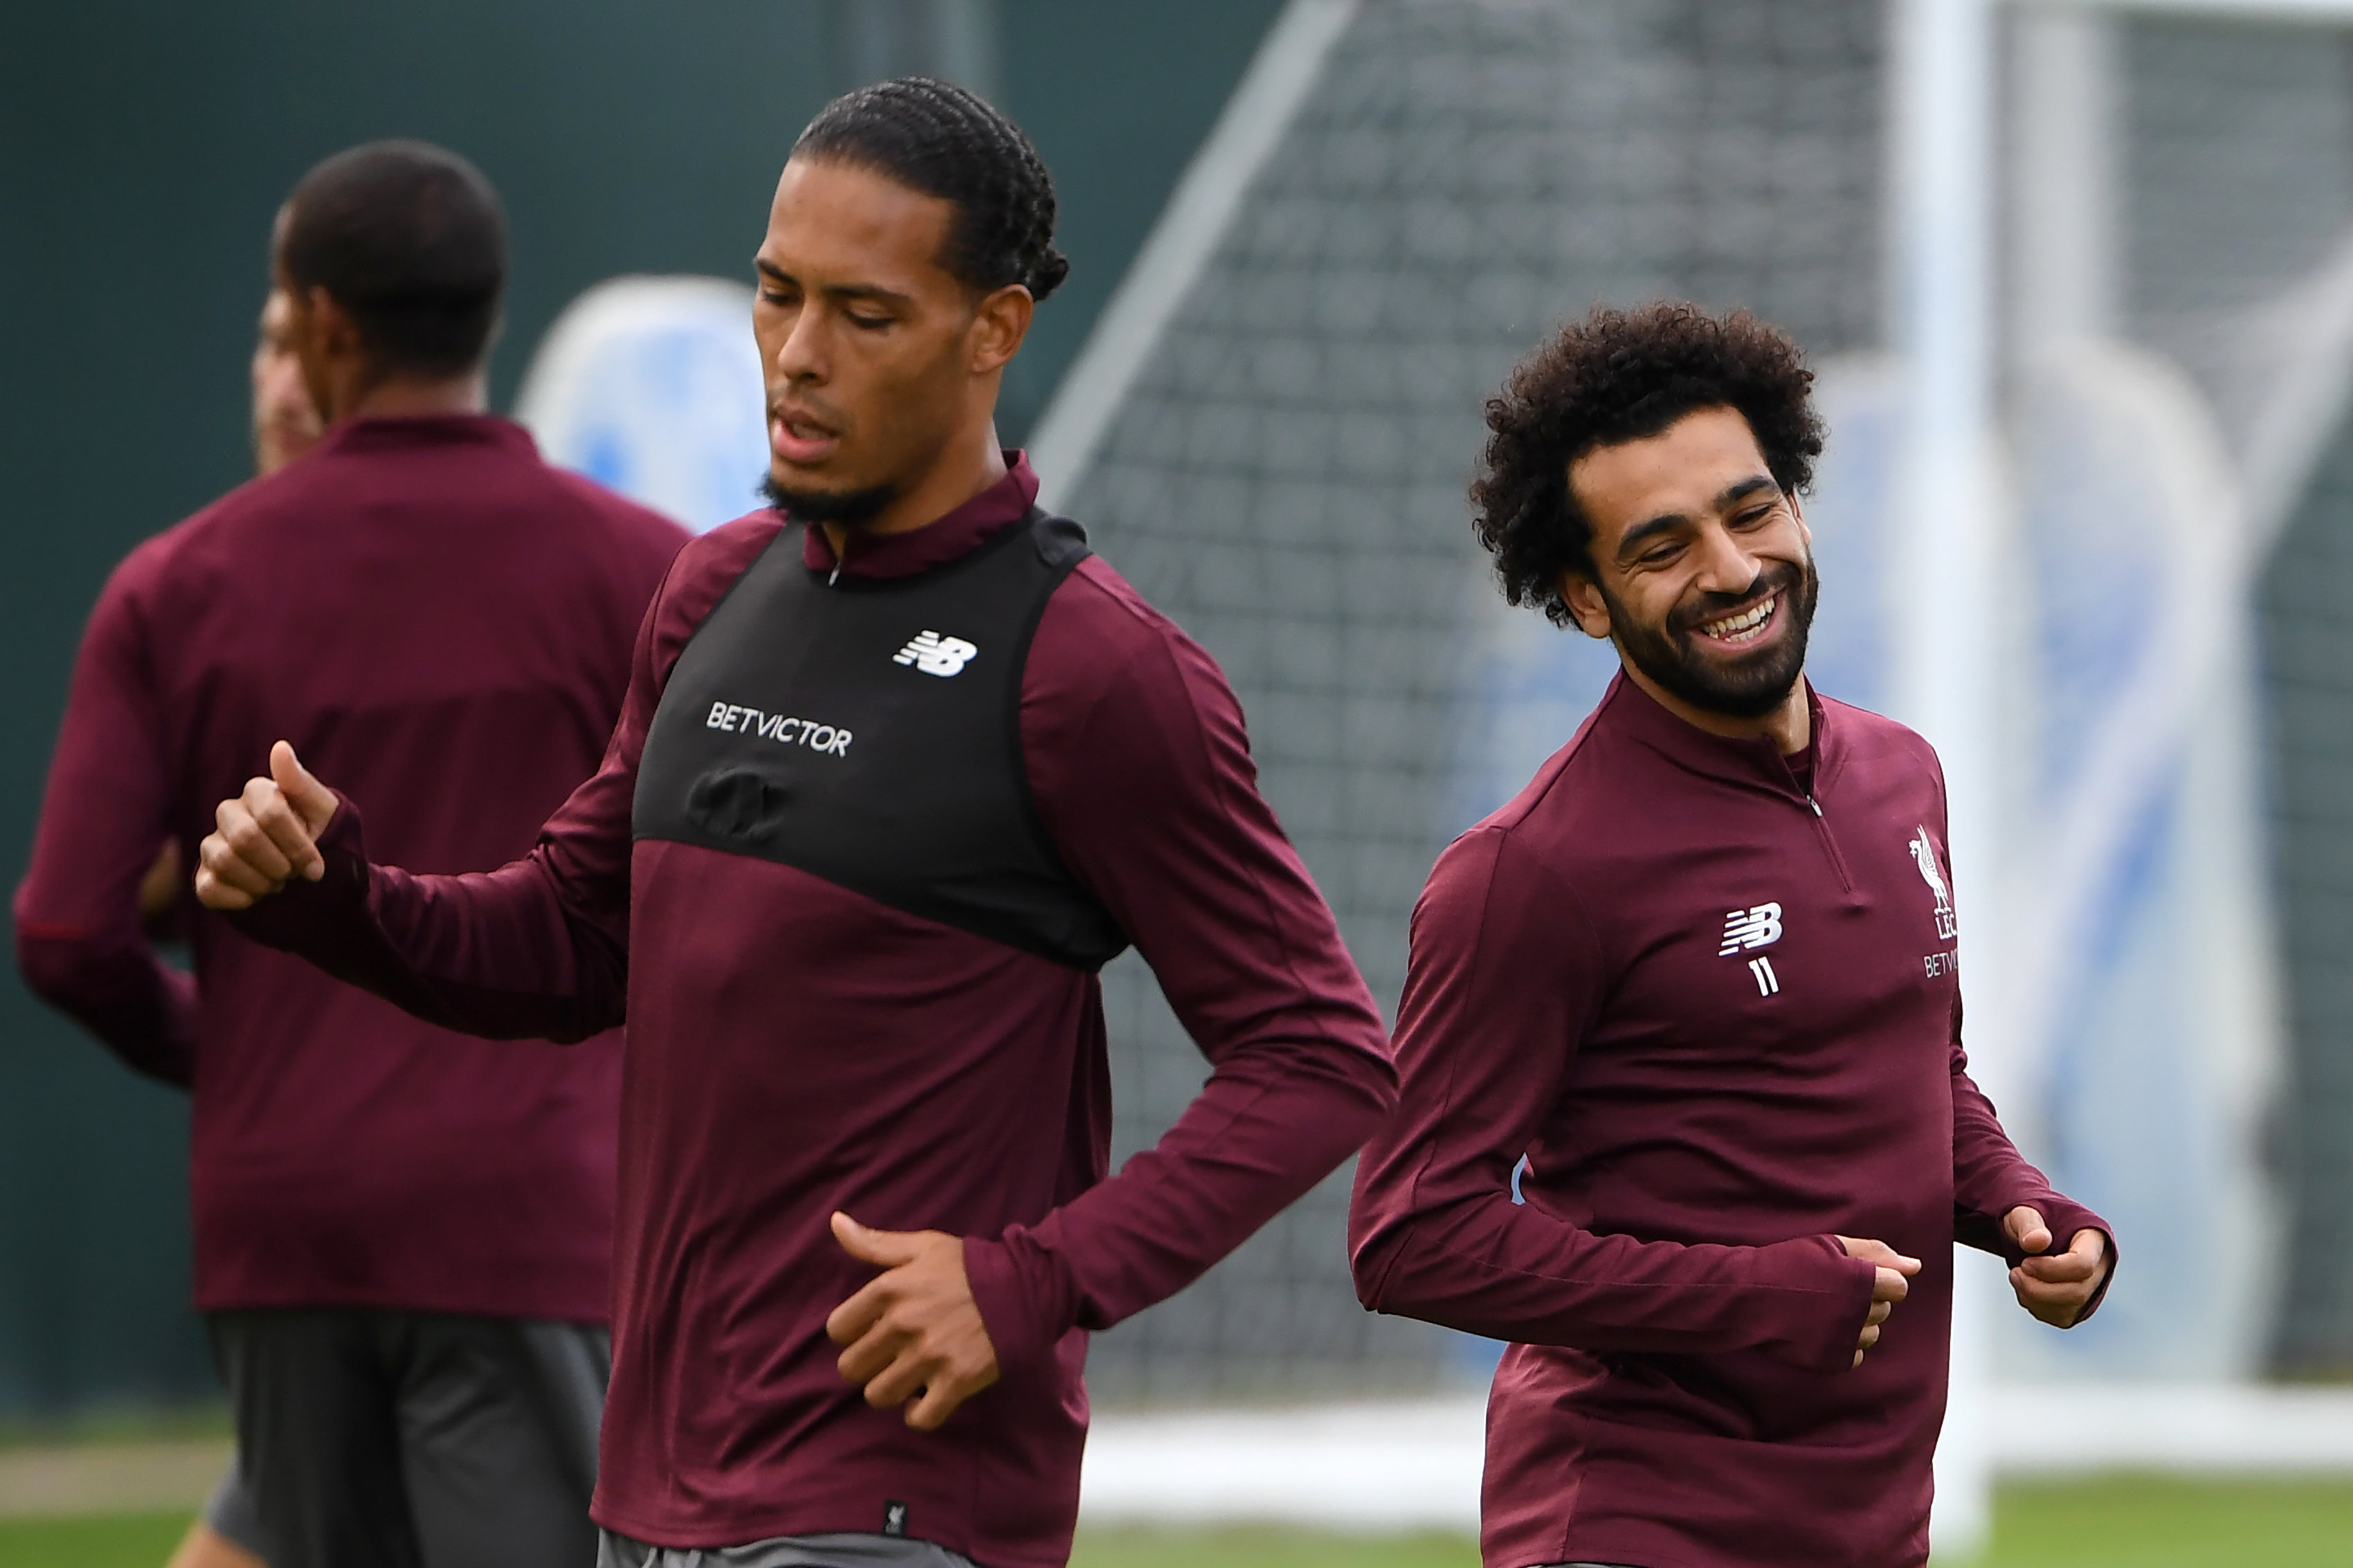 Liverpool's Egyptian midfielder Mohamed Salah (R) and Liverpool's Dutch defender Virgil van Dijk attend a team training session at their Melwood training complex in Liverpool, north west England, on September 17, 2018, on the eve of their UEFA Champions League group C football match against Paris Saint-Germain. (Photo by Paul ELLIS / AFP)        (Photo credit should read PAUL ELLIS/AFP/Getty Images)